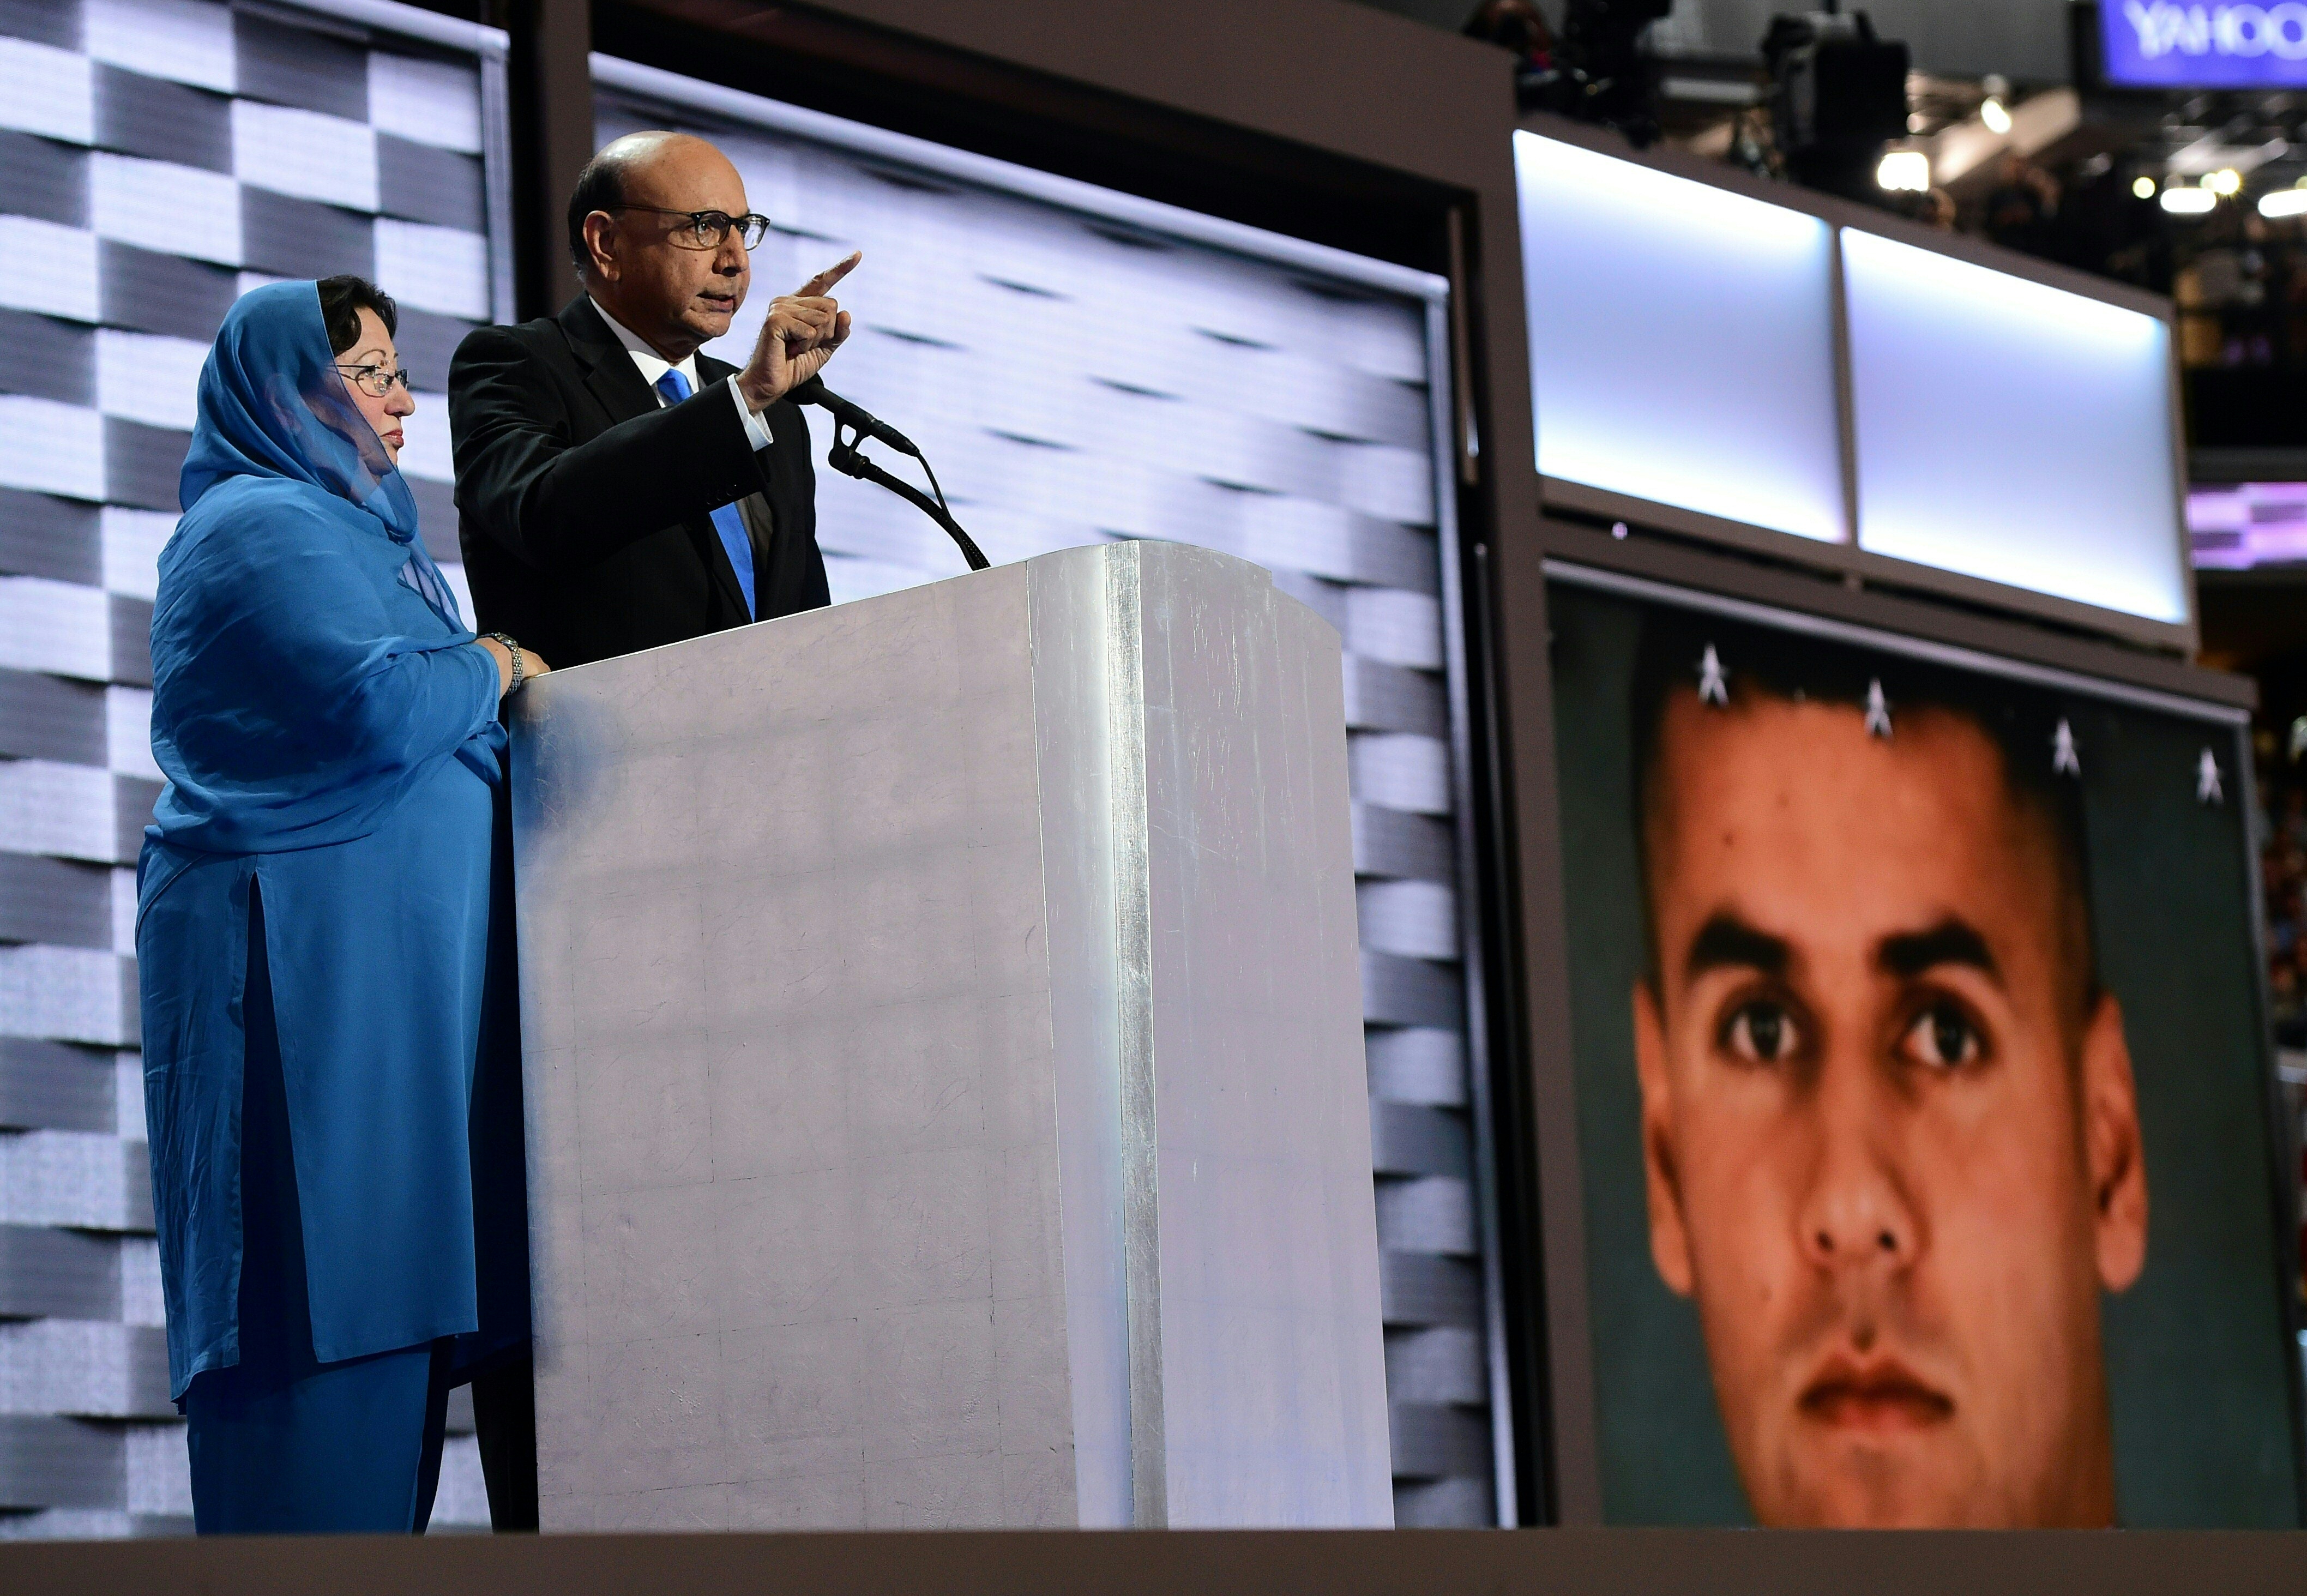 Khizr Khan speaks during the final day of the 2016 Democratic National Convention on July 28, 2016, in Philadelphia, PA. (Robyn Beck—AFP/Getty Images)